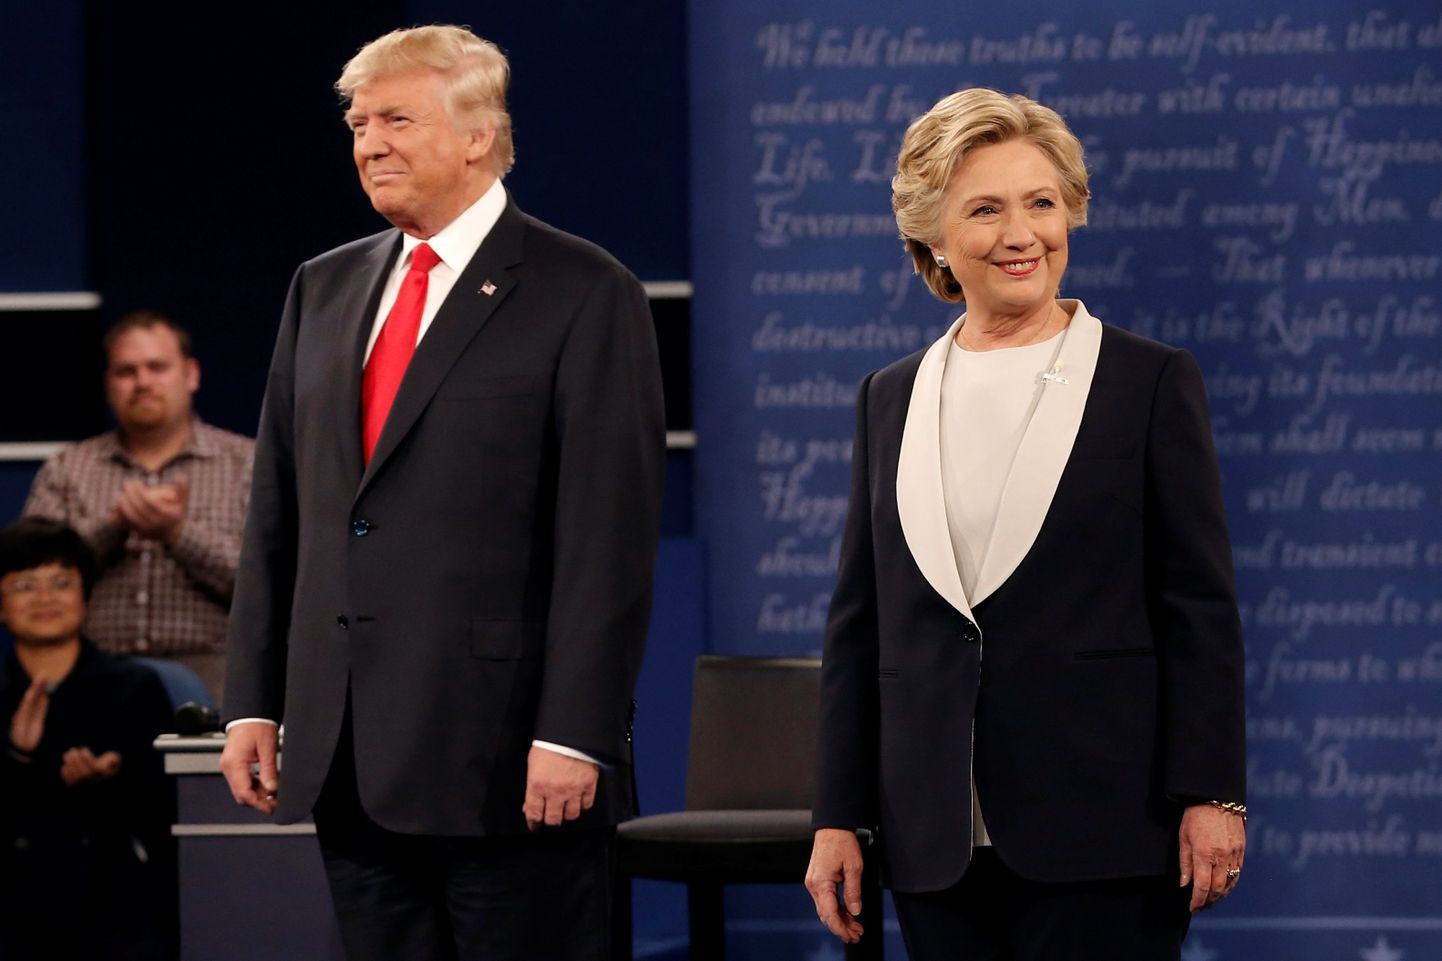 Republican U.S. presidential nominee Donald Trump and Democratic U.S. presidential nominee Hillary Clinton appear together during their presidential town hall debate at Washington University in St. Louis, Missouri, U.S., October 9, 2016.   REUTERS/Mike Segar